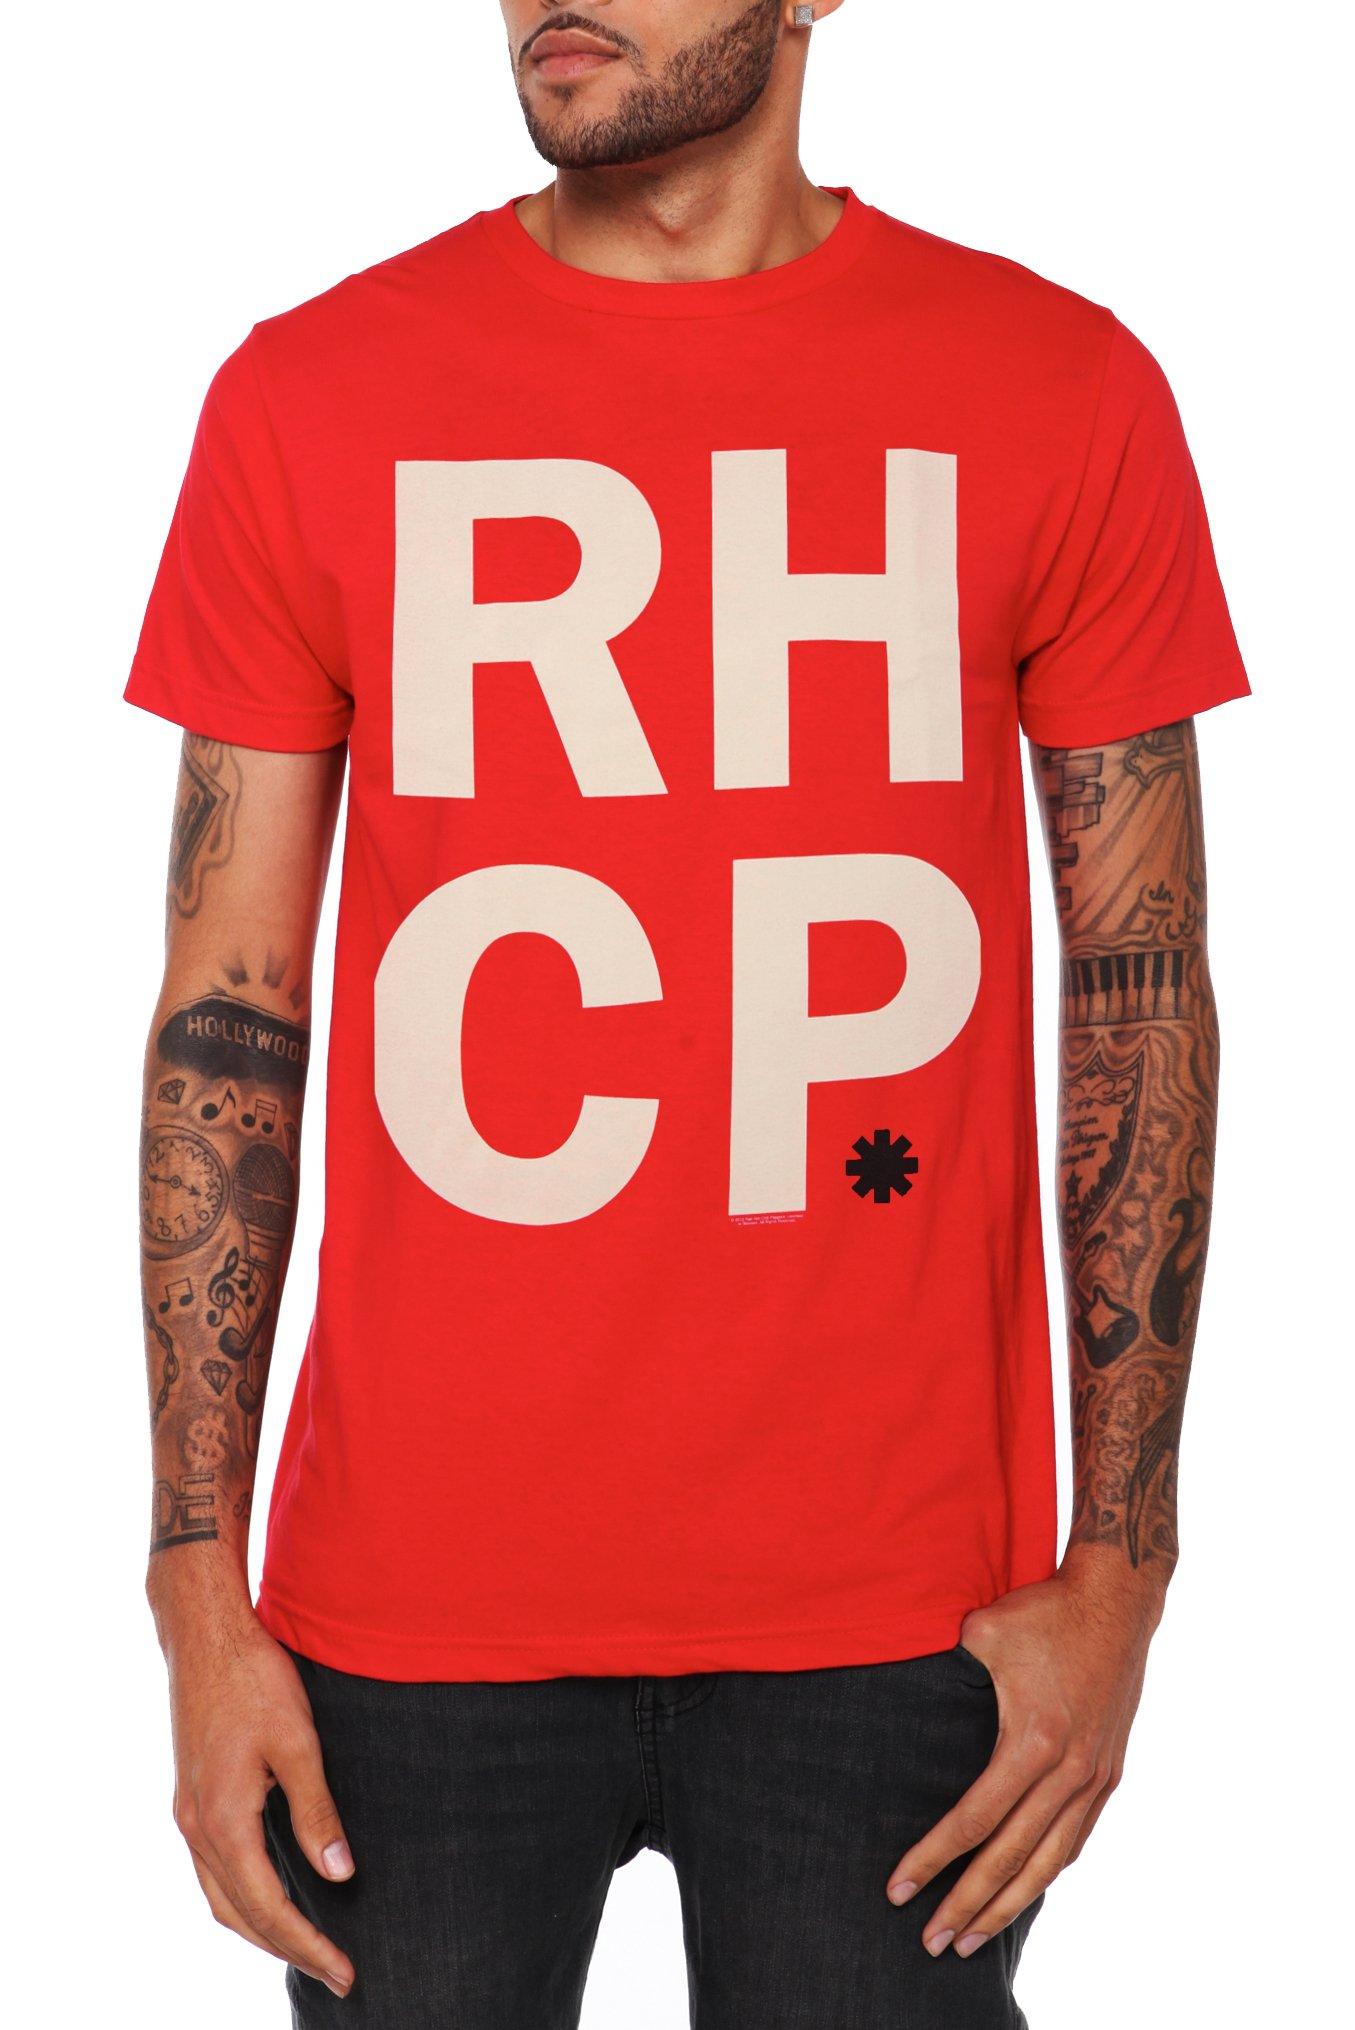 Red Hot Chili Peppers RHCP T-Shirt, BLACK, hi-res